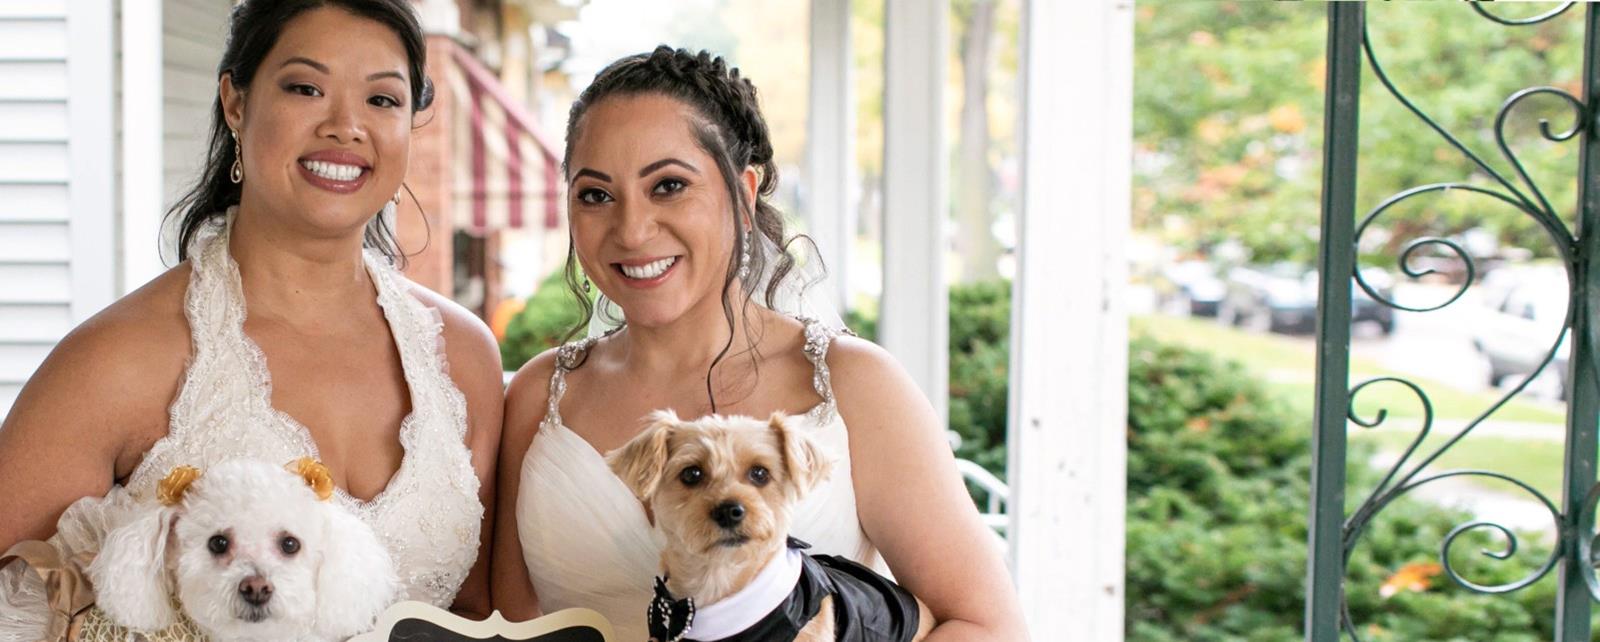 Two Women In Wedding Dresses With Dogs